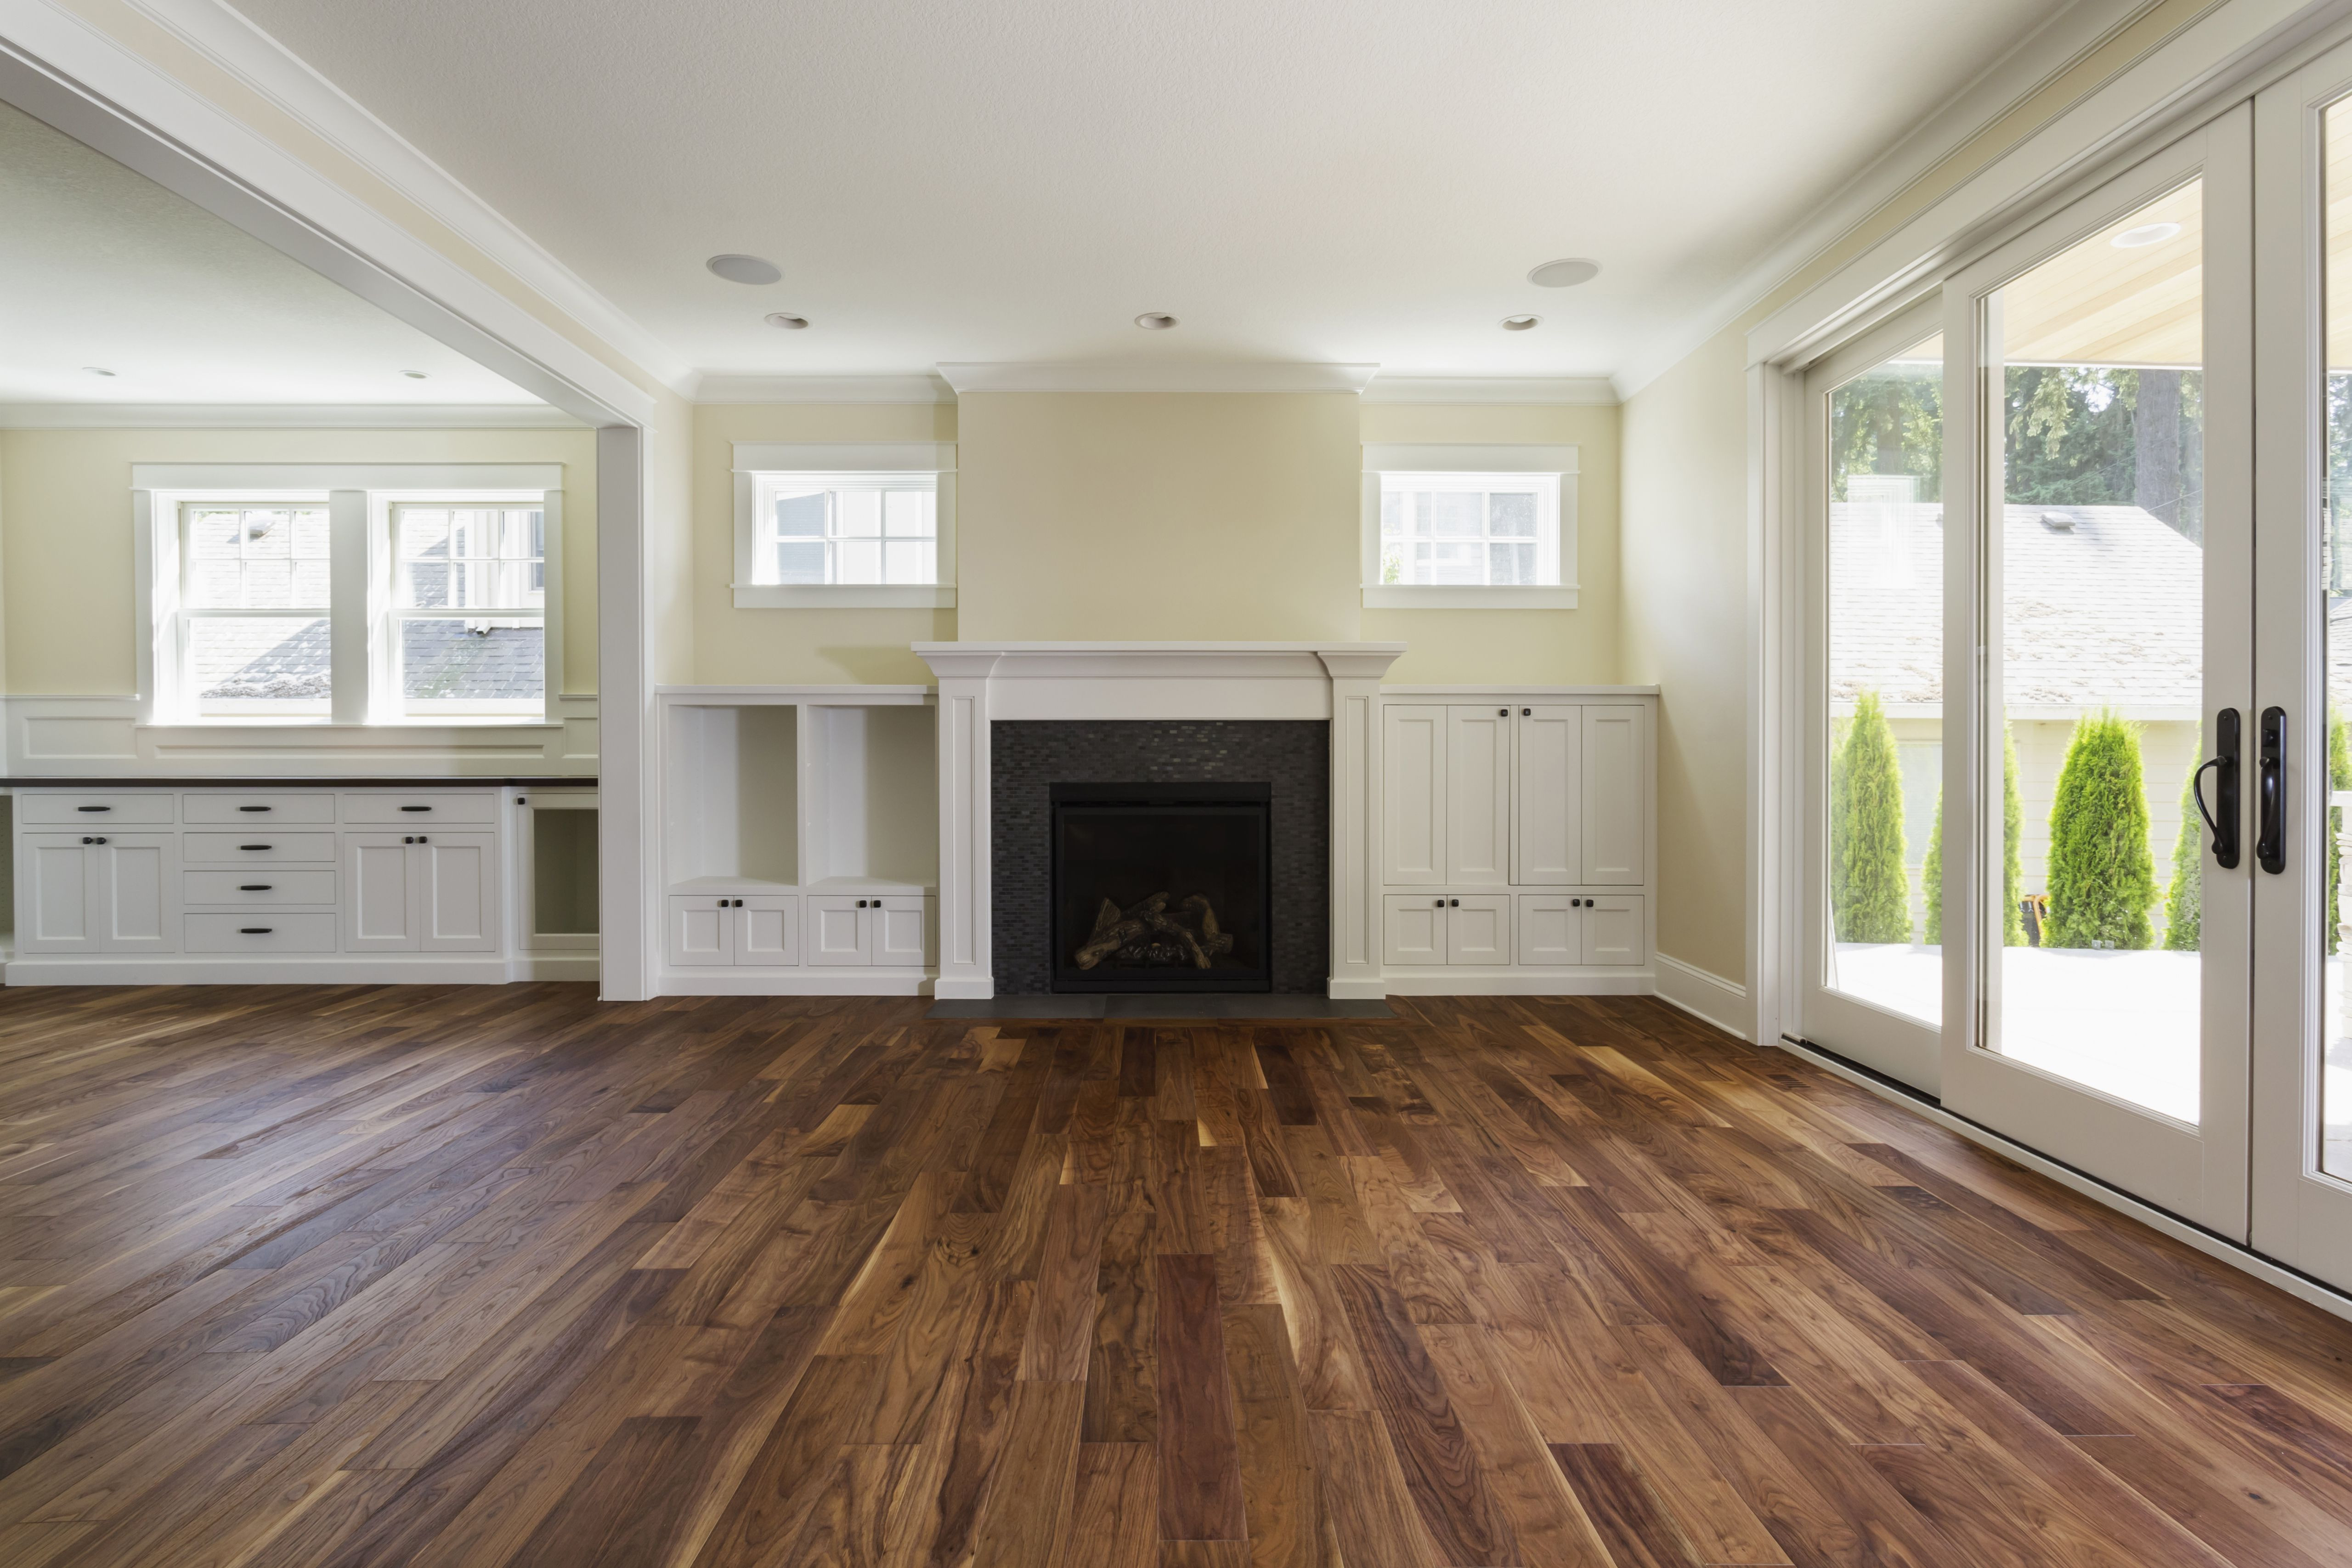 28 Fantastic How Much to Refinish Hardwood Floors Diy 2024 free download how much to refinish hardwood floors diy of the pros and cons of prefinished hardwood flooring with fireplace and built in shelves in living room 482143011 57bef8e33df78cc16e035397